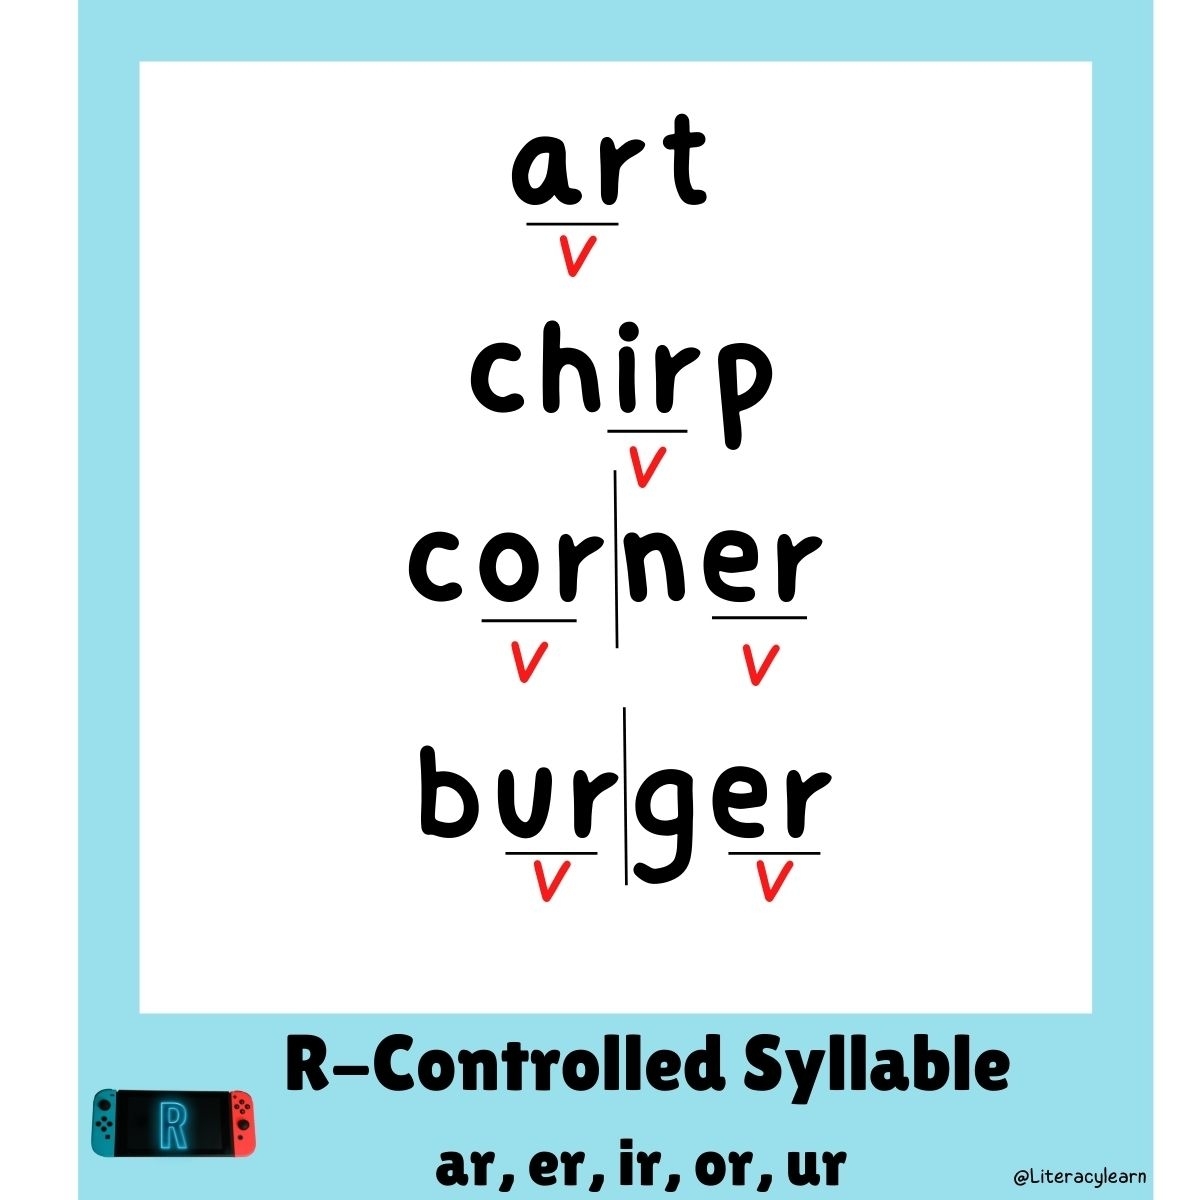 Blue graphic with words "art, chirp, corner, burger' showing R-controlled syllable words.